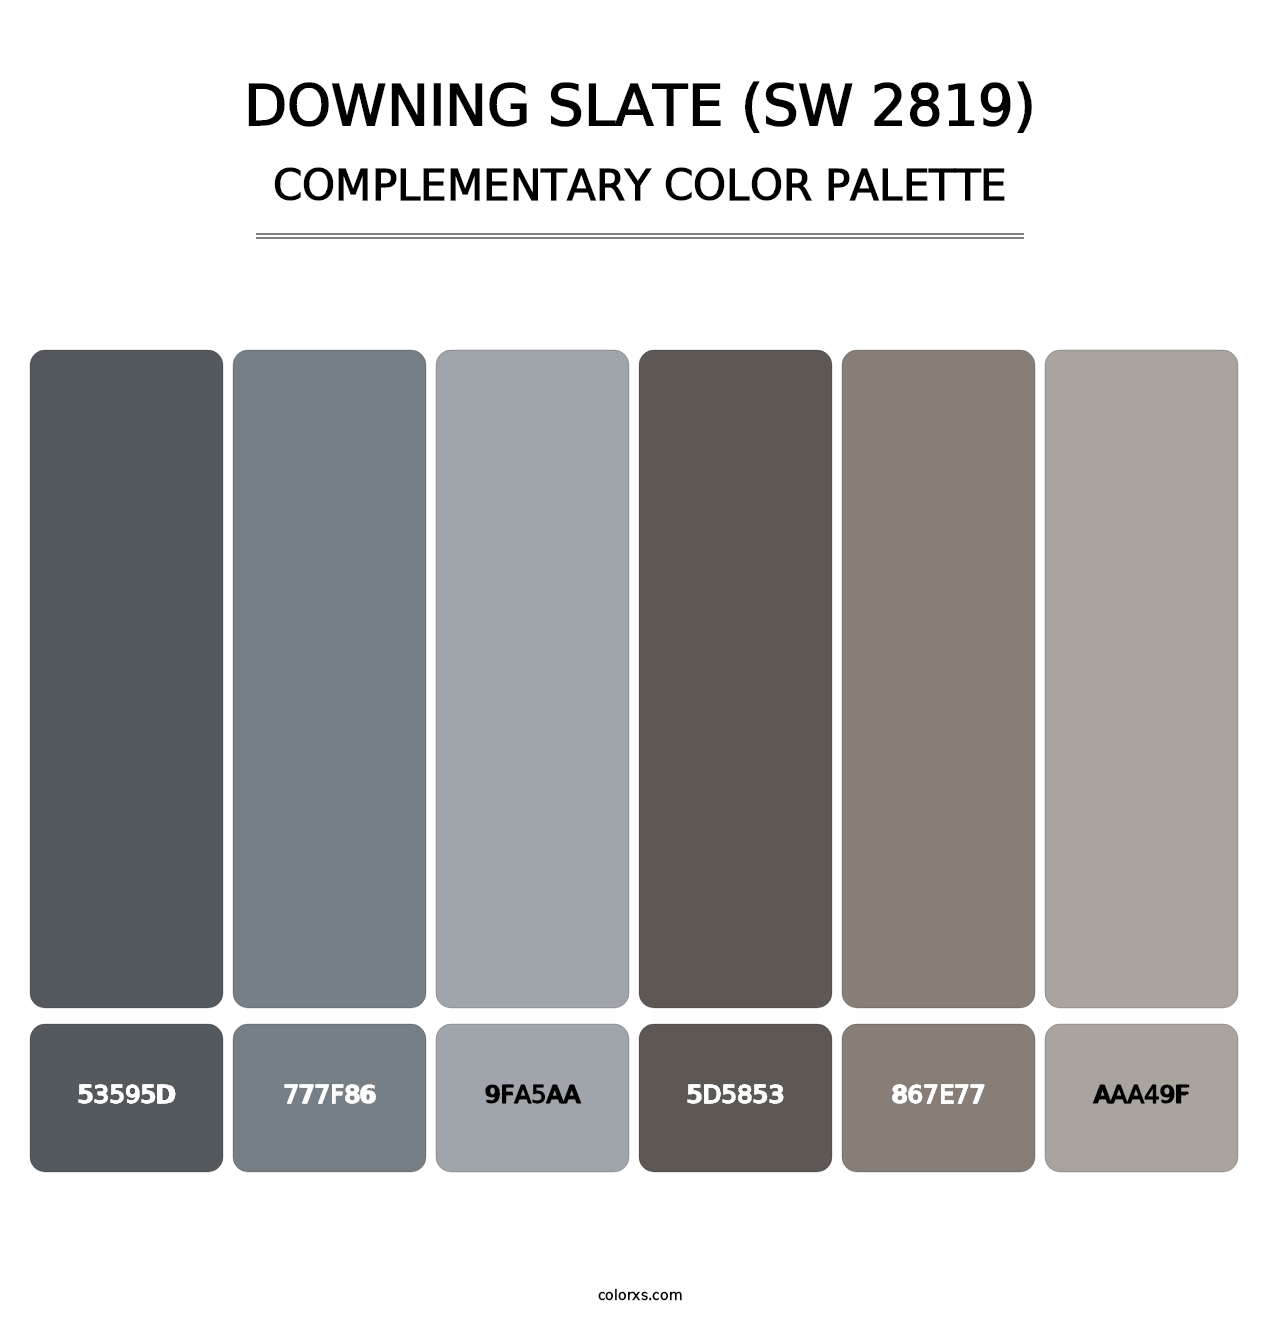 Downing Slate (SW 2819) - Complementary Color Palette